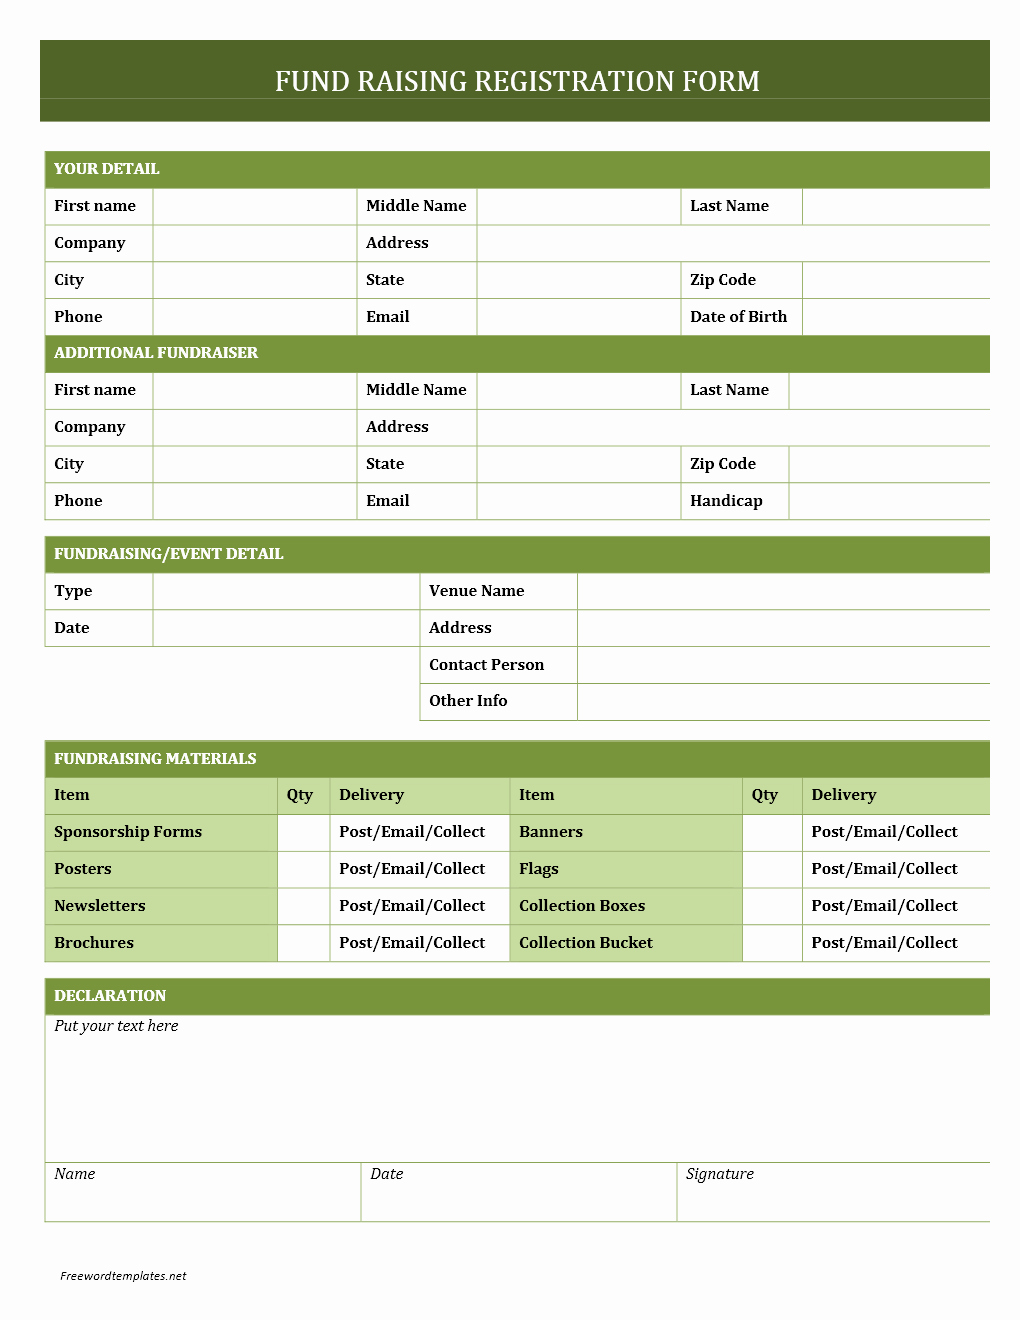 Registration form Template Word Free Luxury Fundraising Registration form